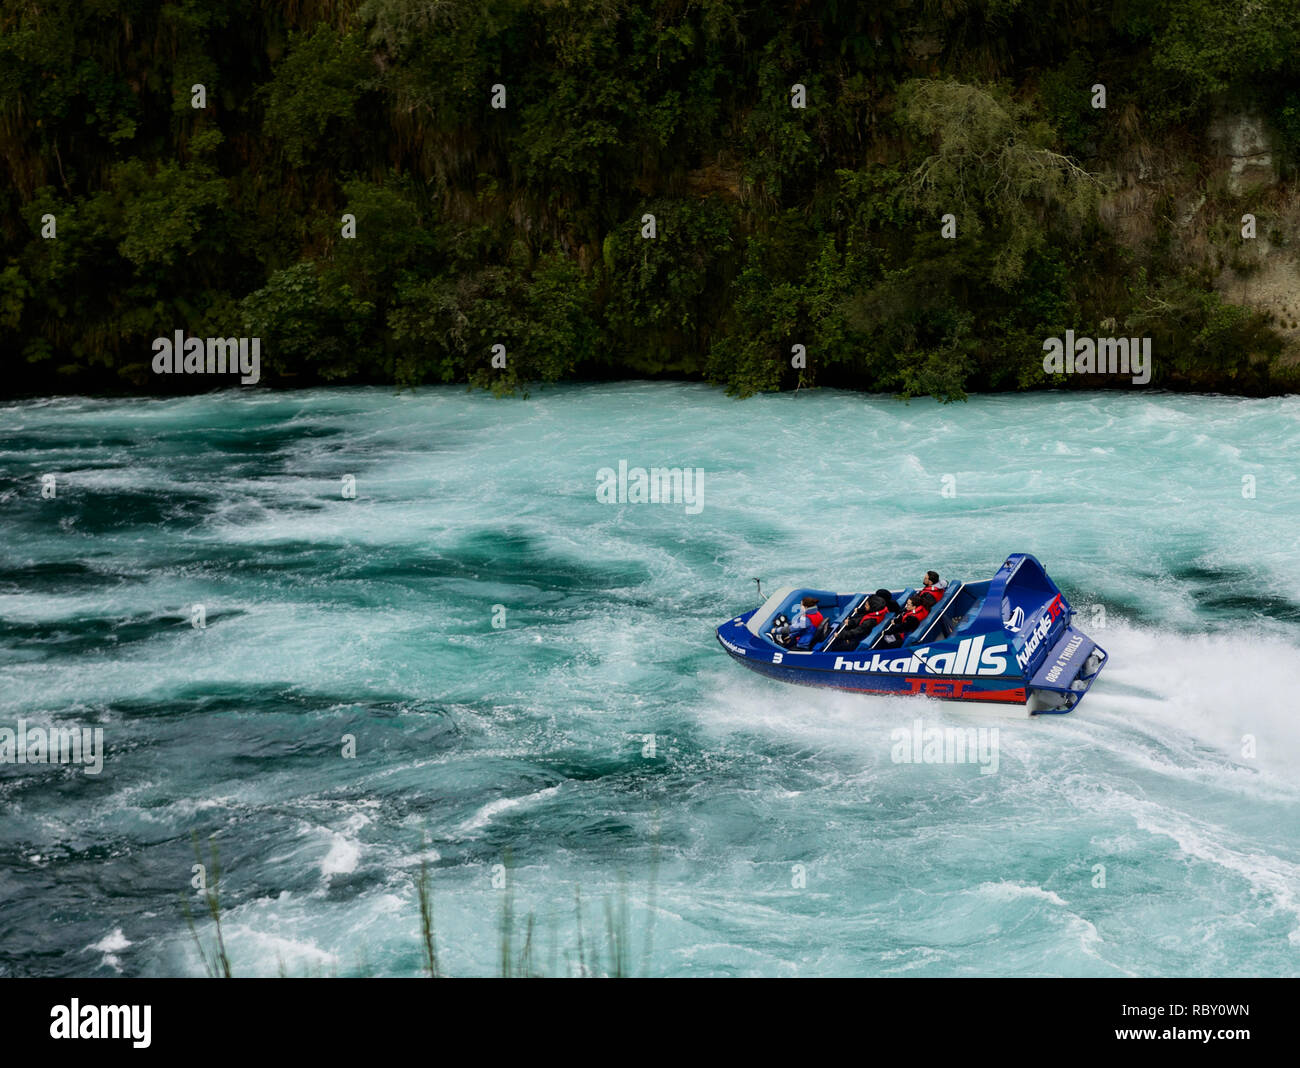 Huka Falls Jet boat leaving the falls behind in deep blue and white turbulent waters Stock Photo